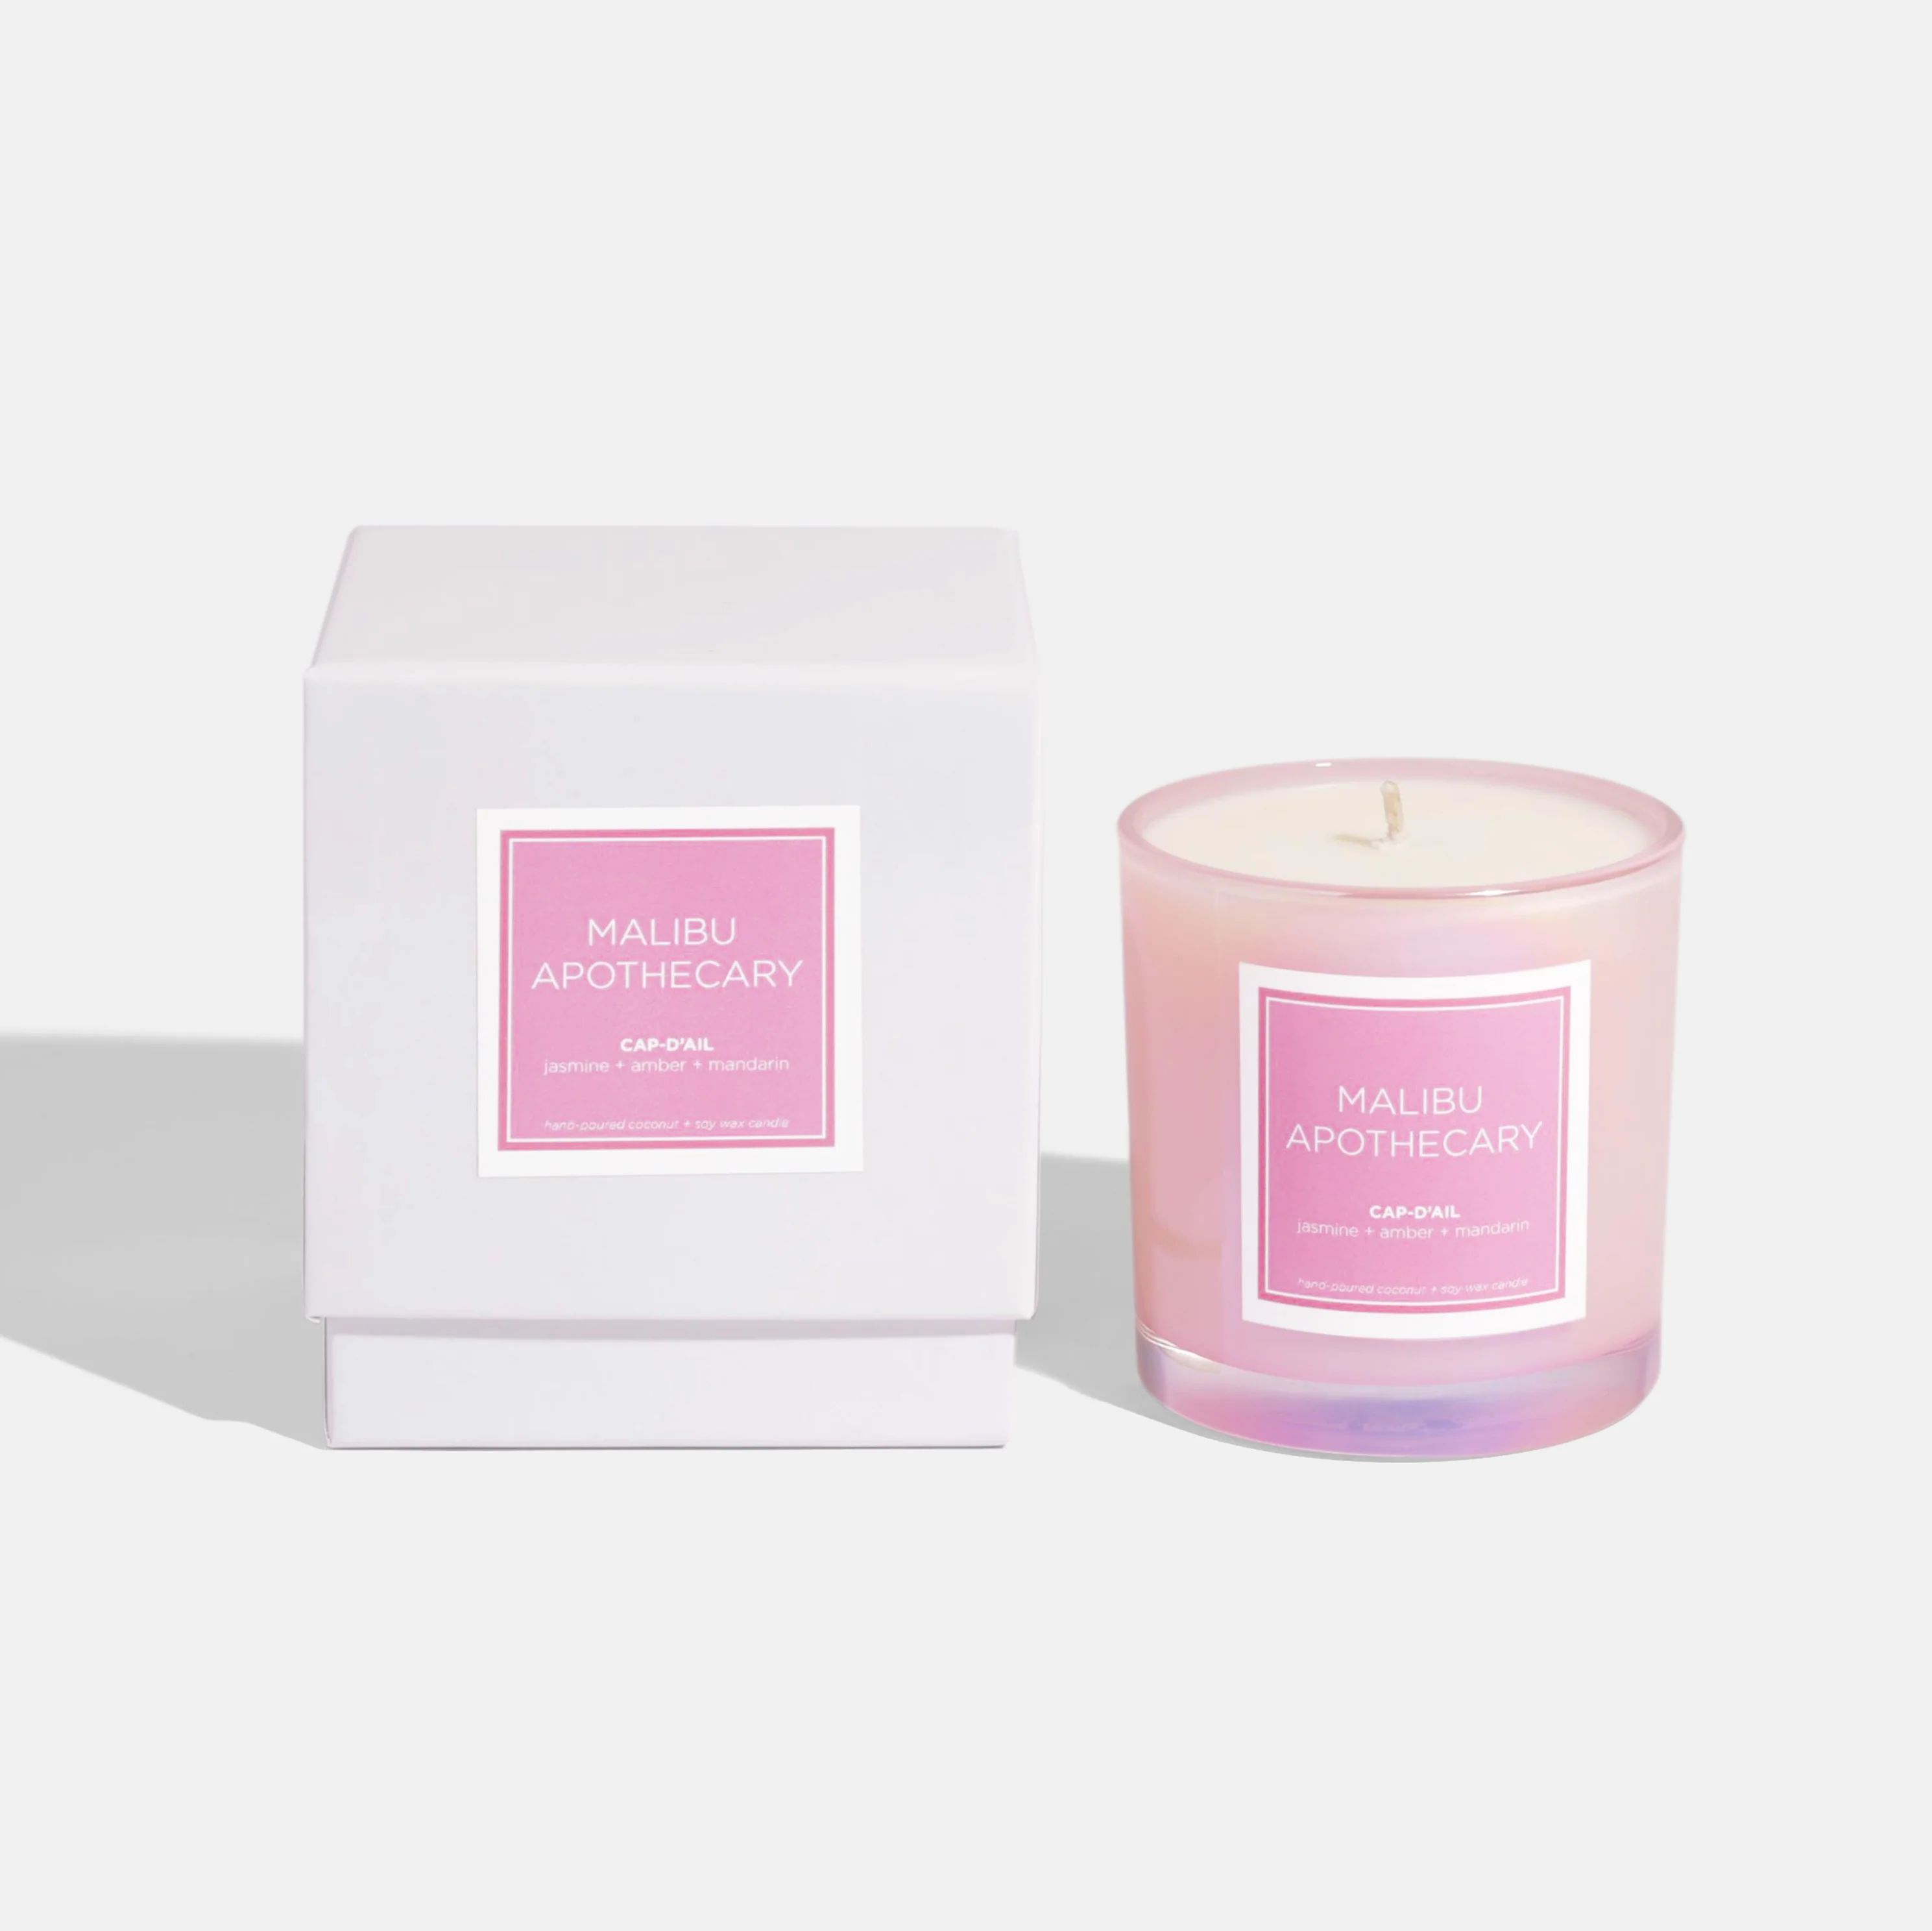 Iridescent Pink Candle by Malibu Apothecary | Support HerStory